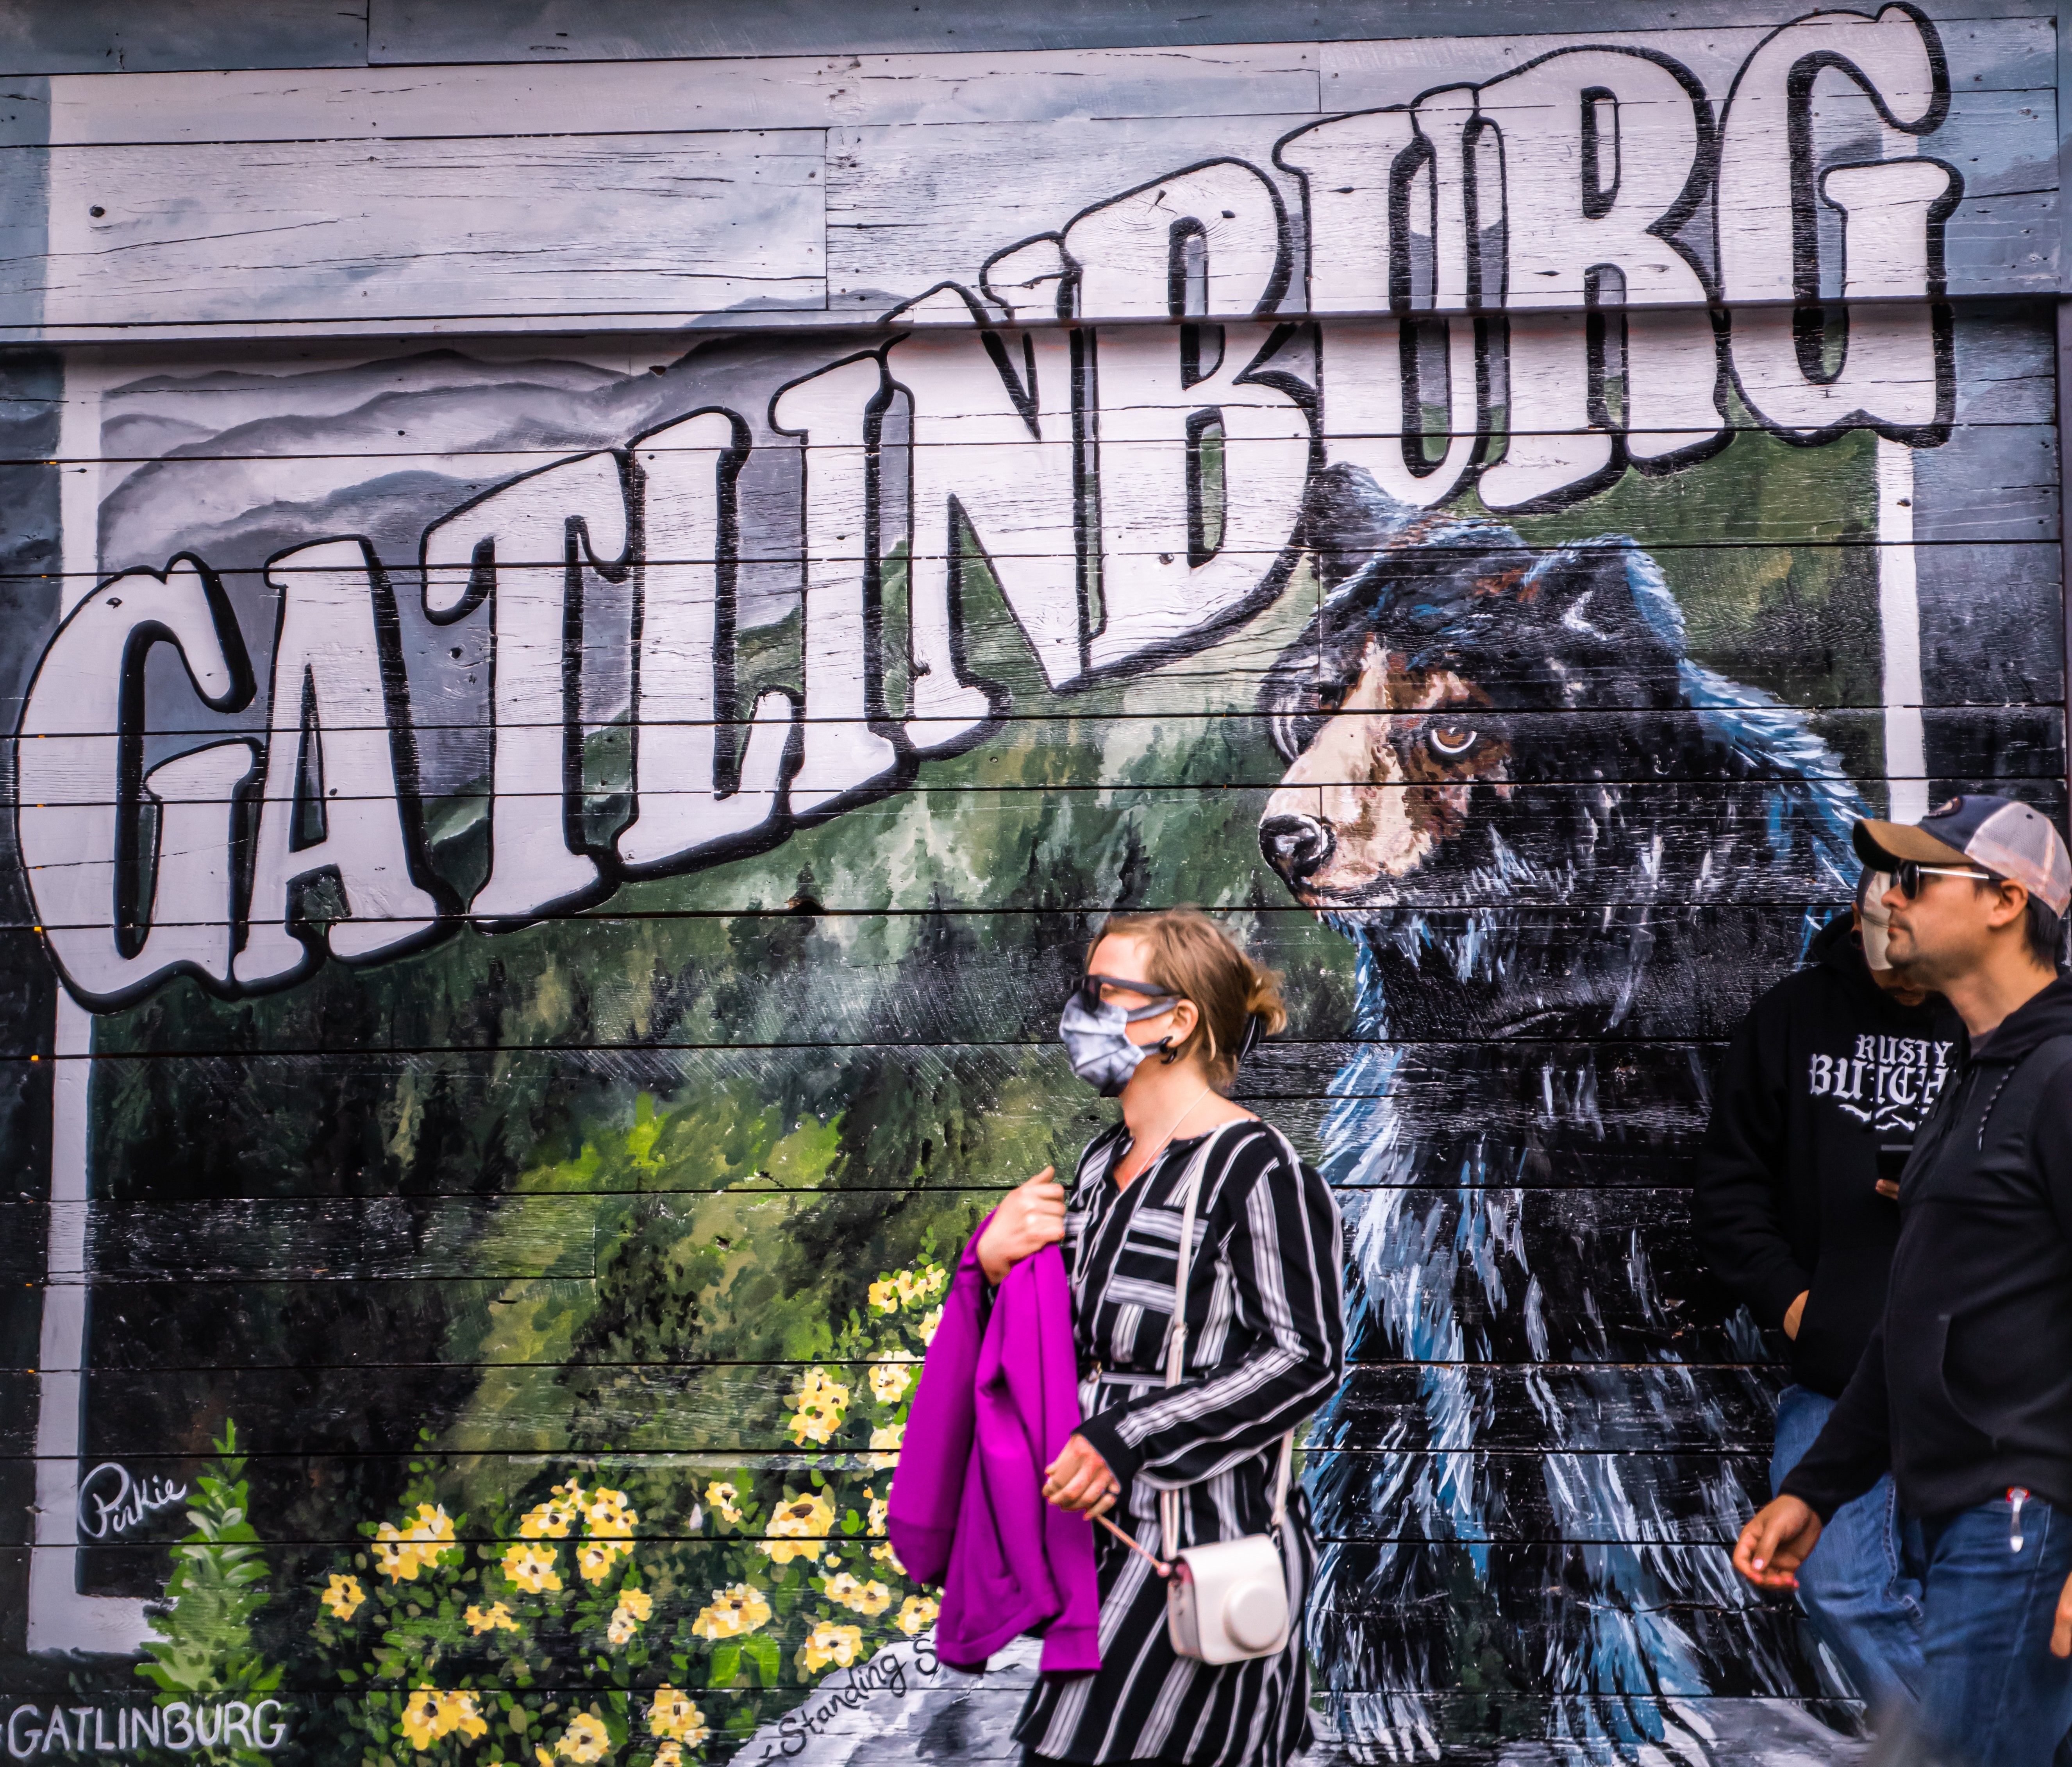  People passing by A wooden wall featuring "Gatlinburg" in Gatlinburg, USA